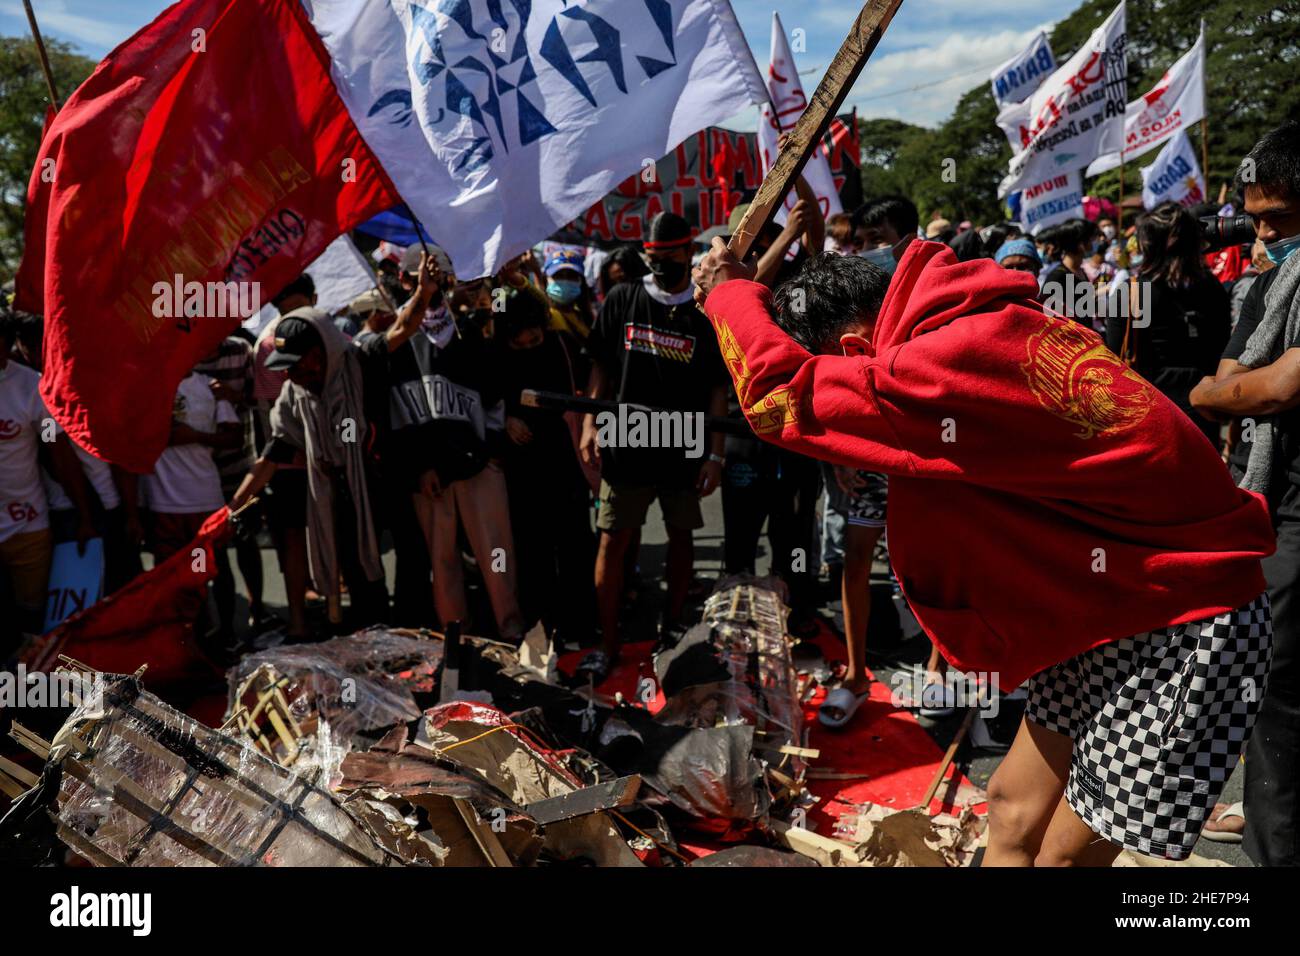 Protesters destroy an effigy of Philippine President Rodrigo Duterte during a protest to mark the 73rd International Human Rights Day at the University of the Philippines in Quezon City, Metro Manila. Thousands of activists from various groups rallied against the implementation of the controversial anti-terror law and alleged human rights violations, including attacks on media workers and alleged extrajudicial killings in President Duterte's crackdown against illegal drugs. Philippines. Stock Photo